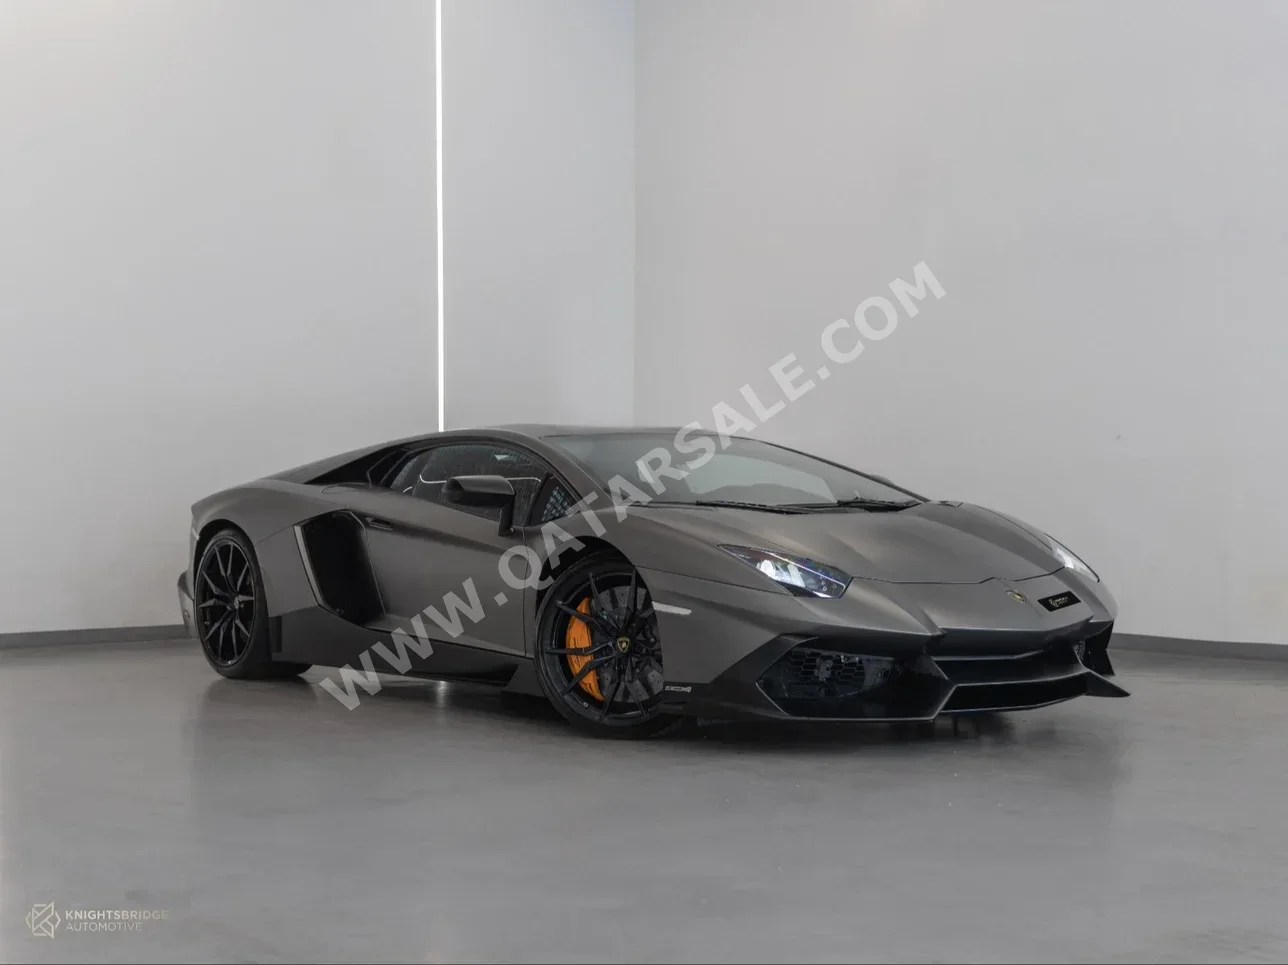  Lamborghini  Aventador  50th Anniversary  2014  Automatic  32,000 Km  12 Cylinder  All Wheel Drive (AWD)  Coupe / Sport  Gray  With Warranty